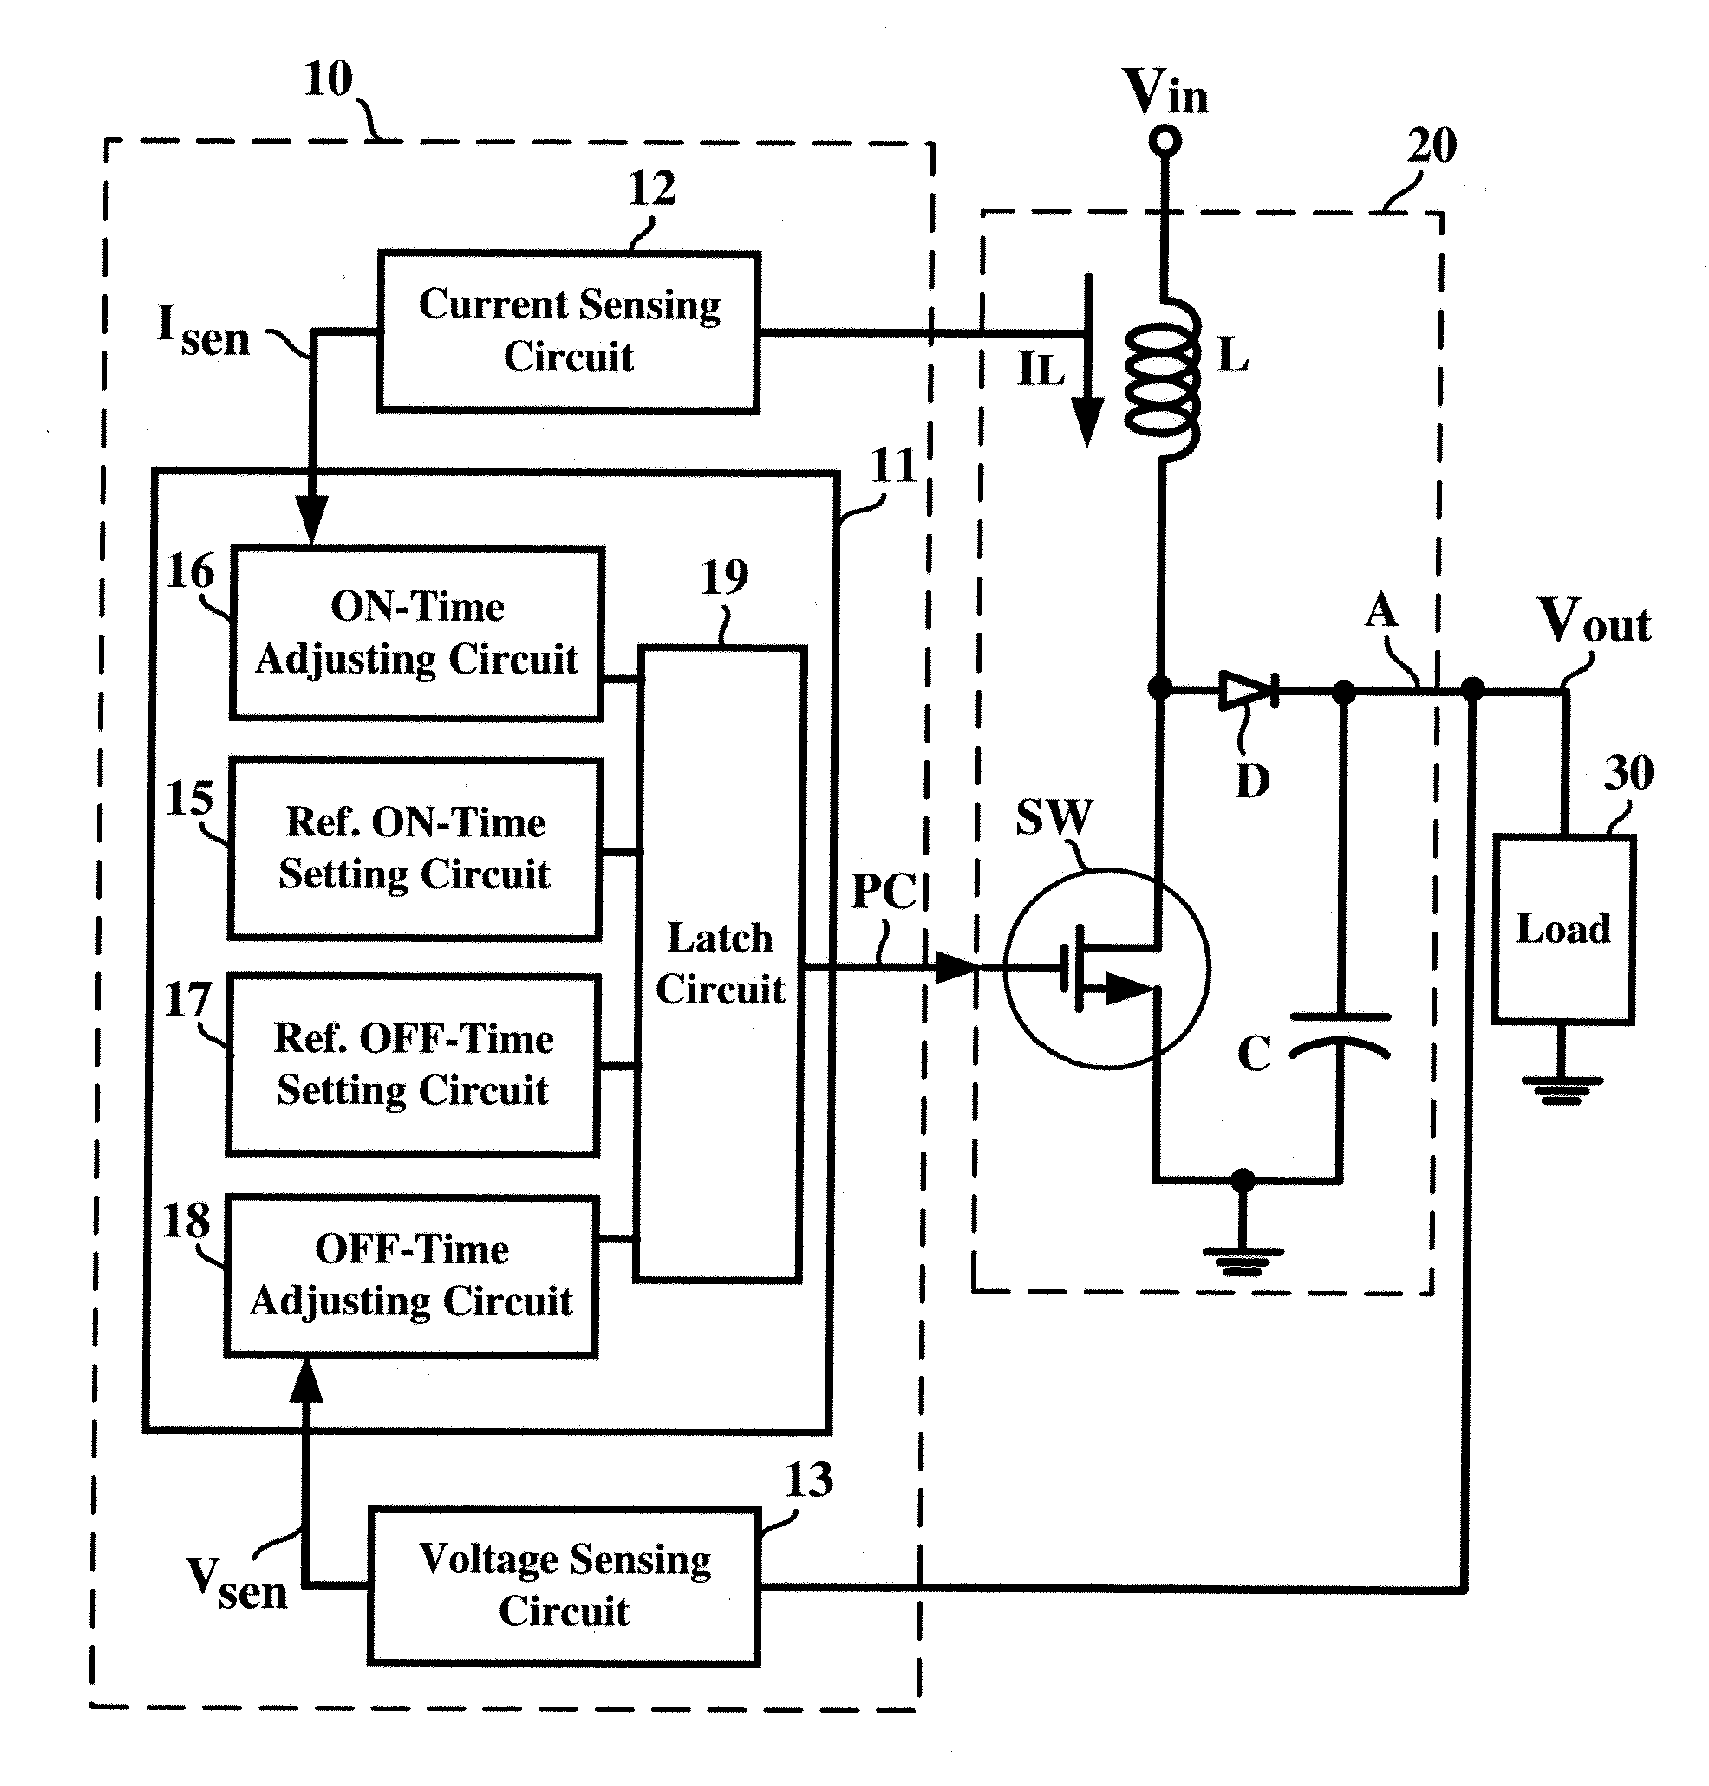 PFM control circuit for converting voltages with high efficiency over broad loading requirements